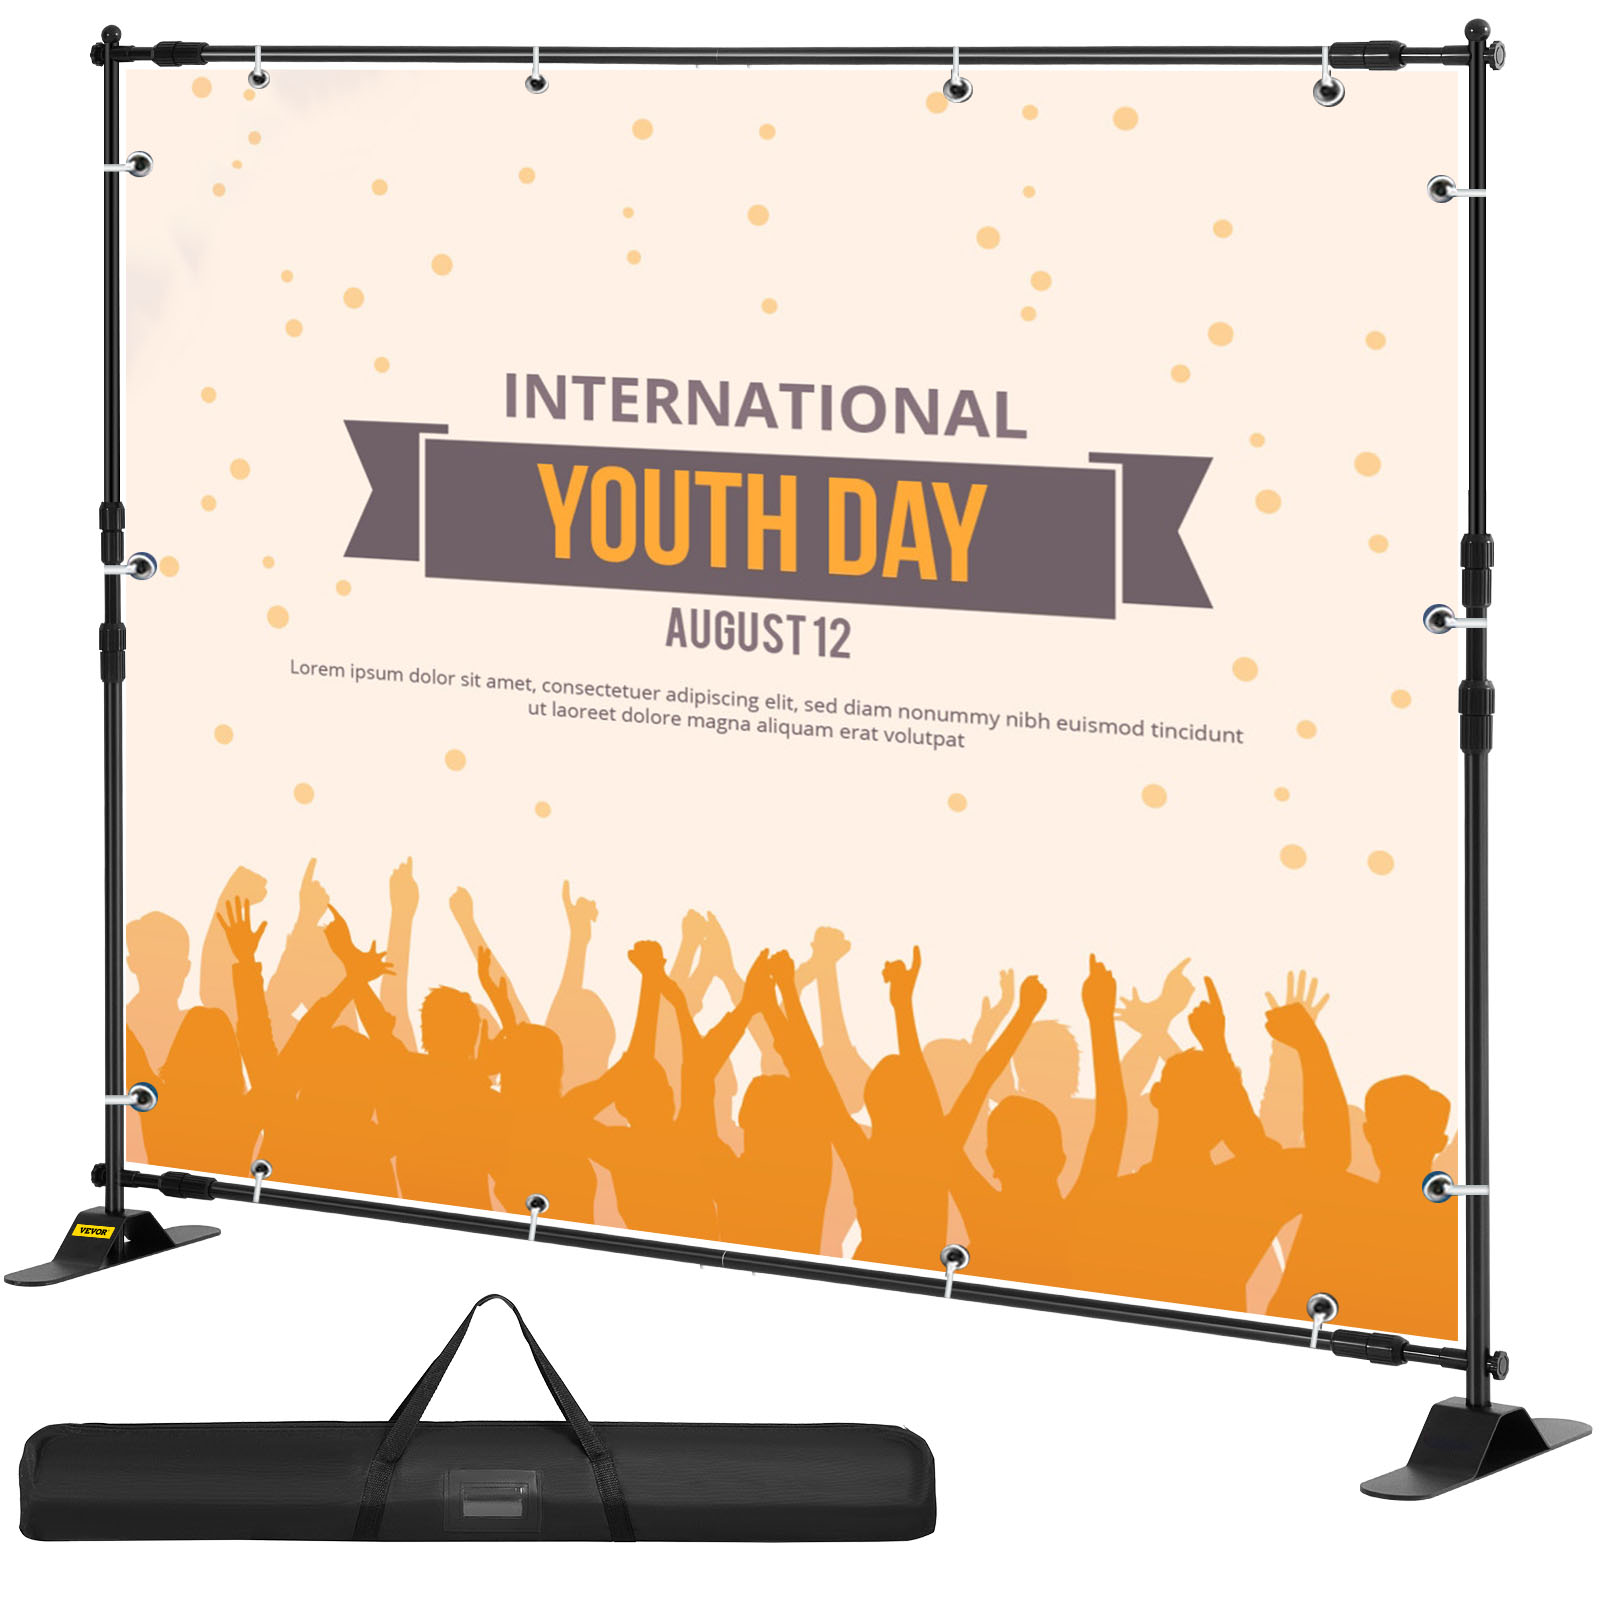 VEVOR VEVOR 8FT Backdrop Banner Stand Step and Repeat Adjustable Telescopic  Lightweight Trade Show Display Wall Exhibitor with Carrying Bag VEVOR UK